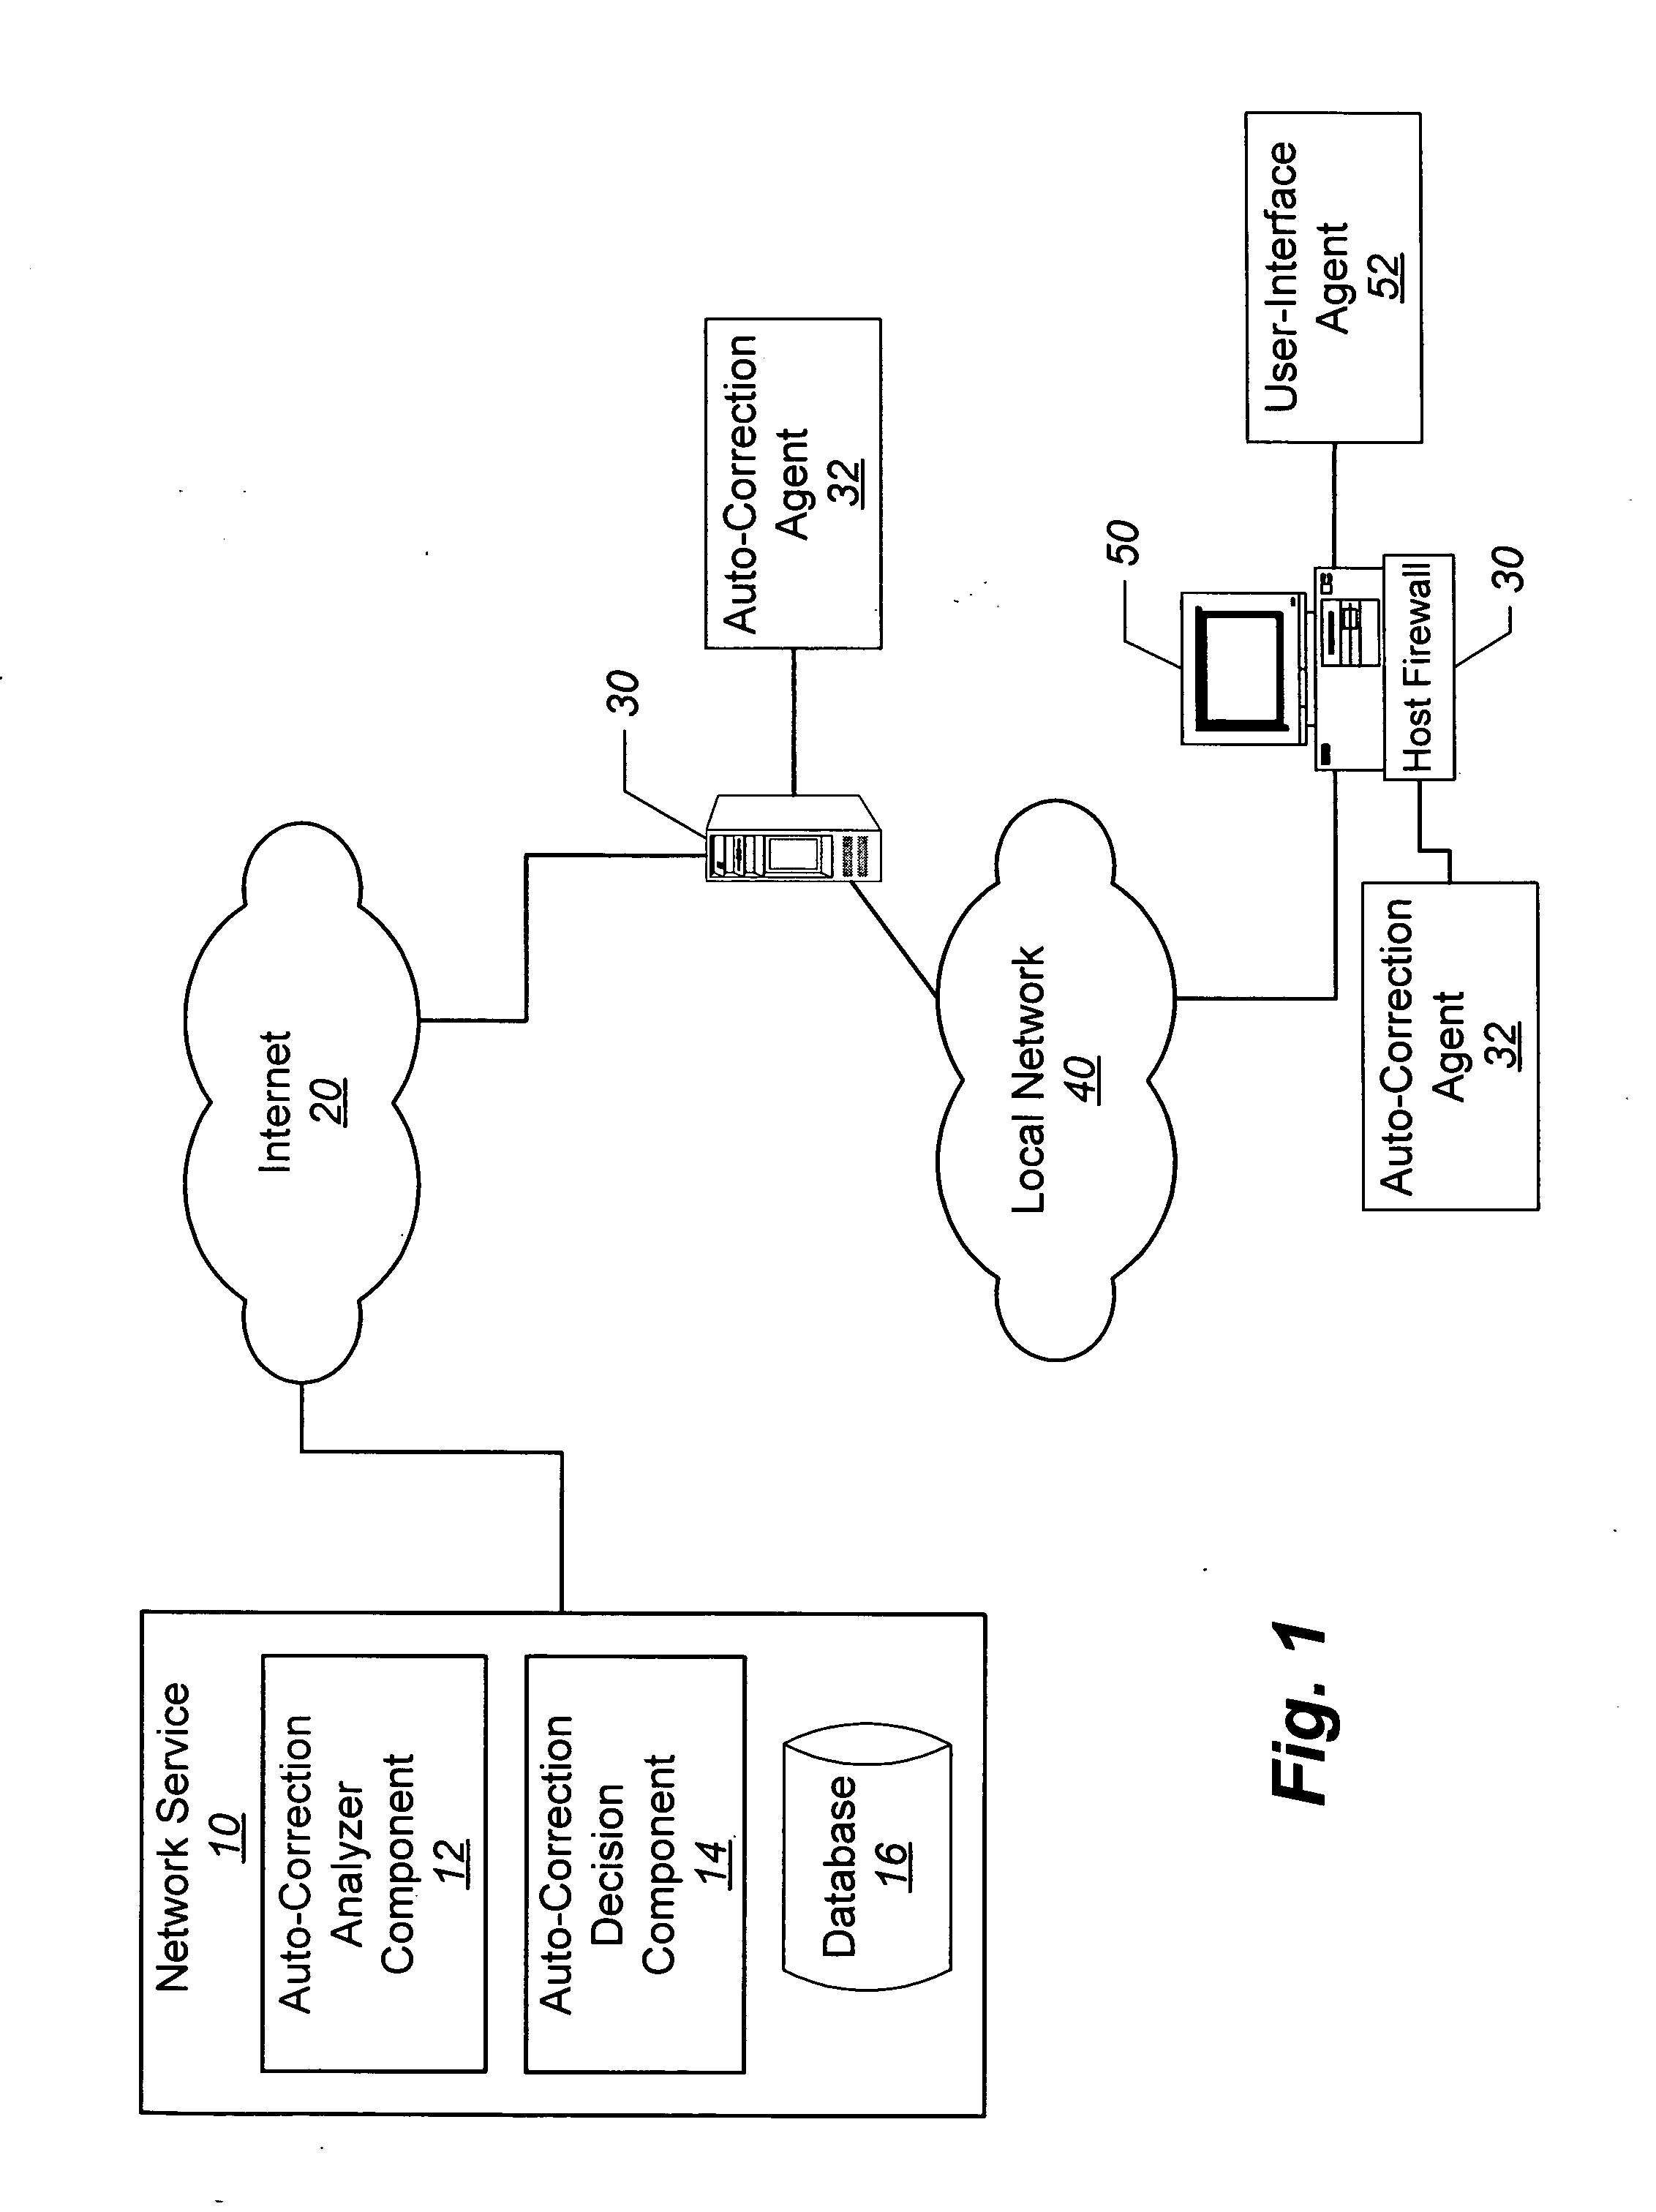 Methods, systems, and computer program products for automatically configuring firewalls